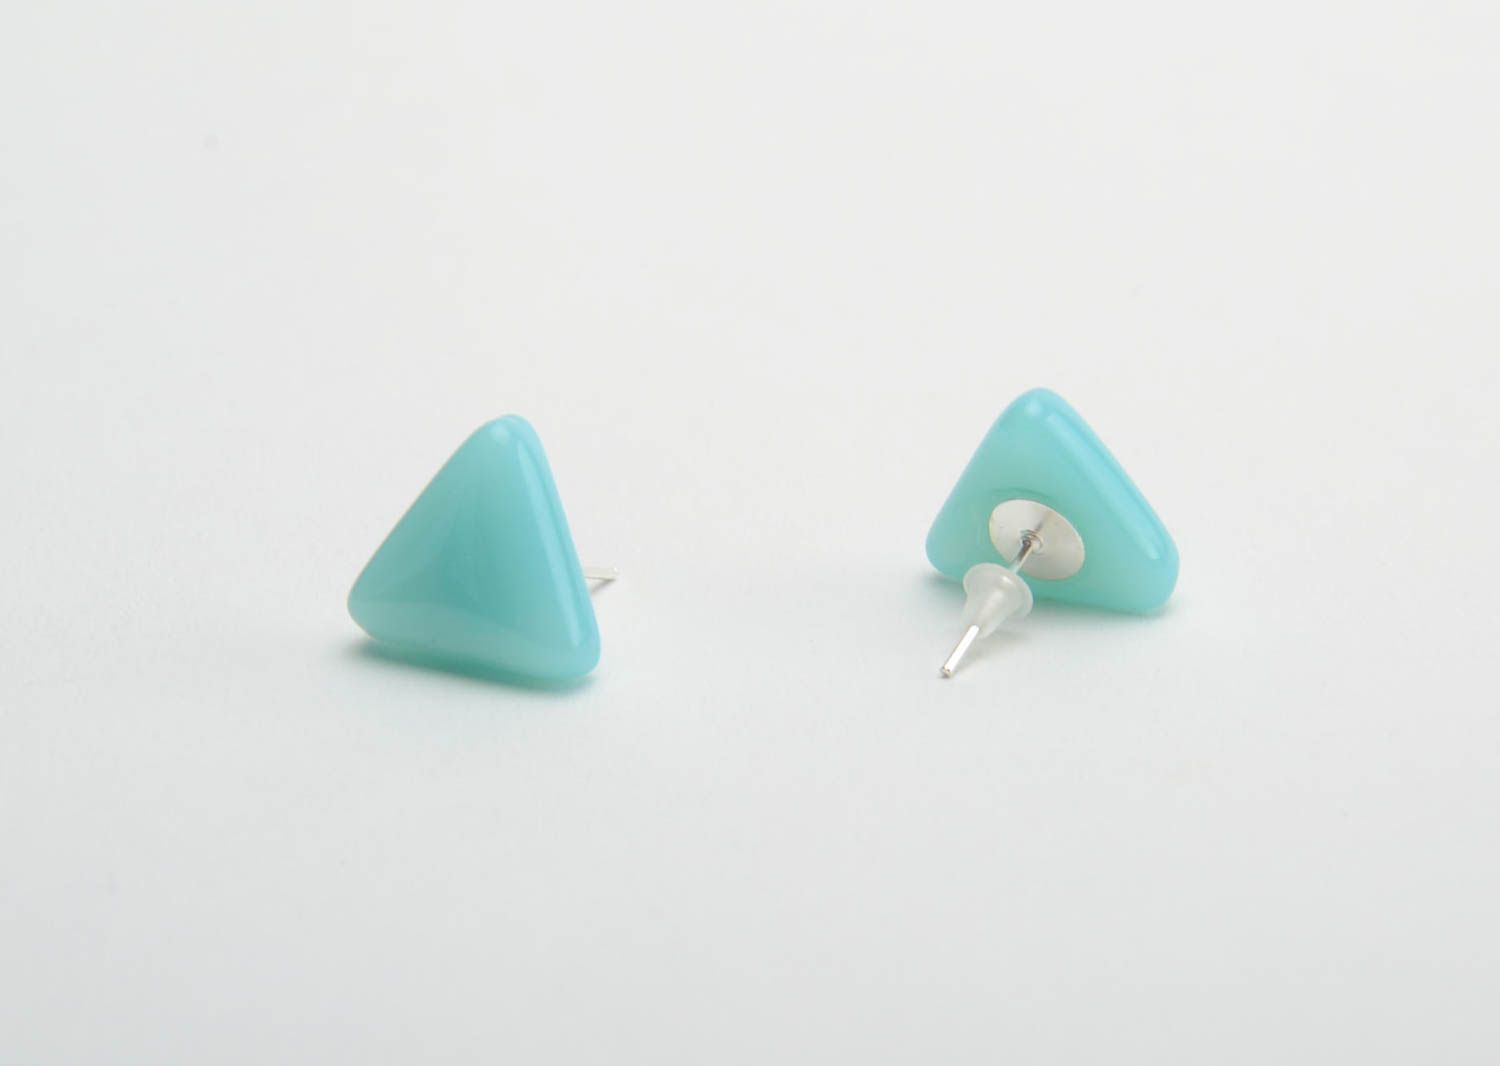 Turquoise color earrings small fusing glass triangular studs handmade accessory photo 3